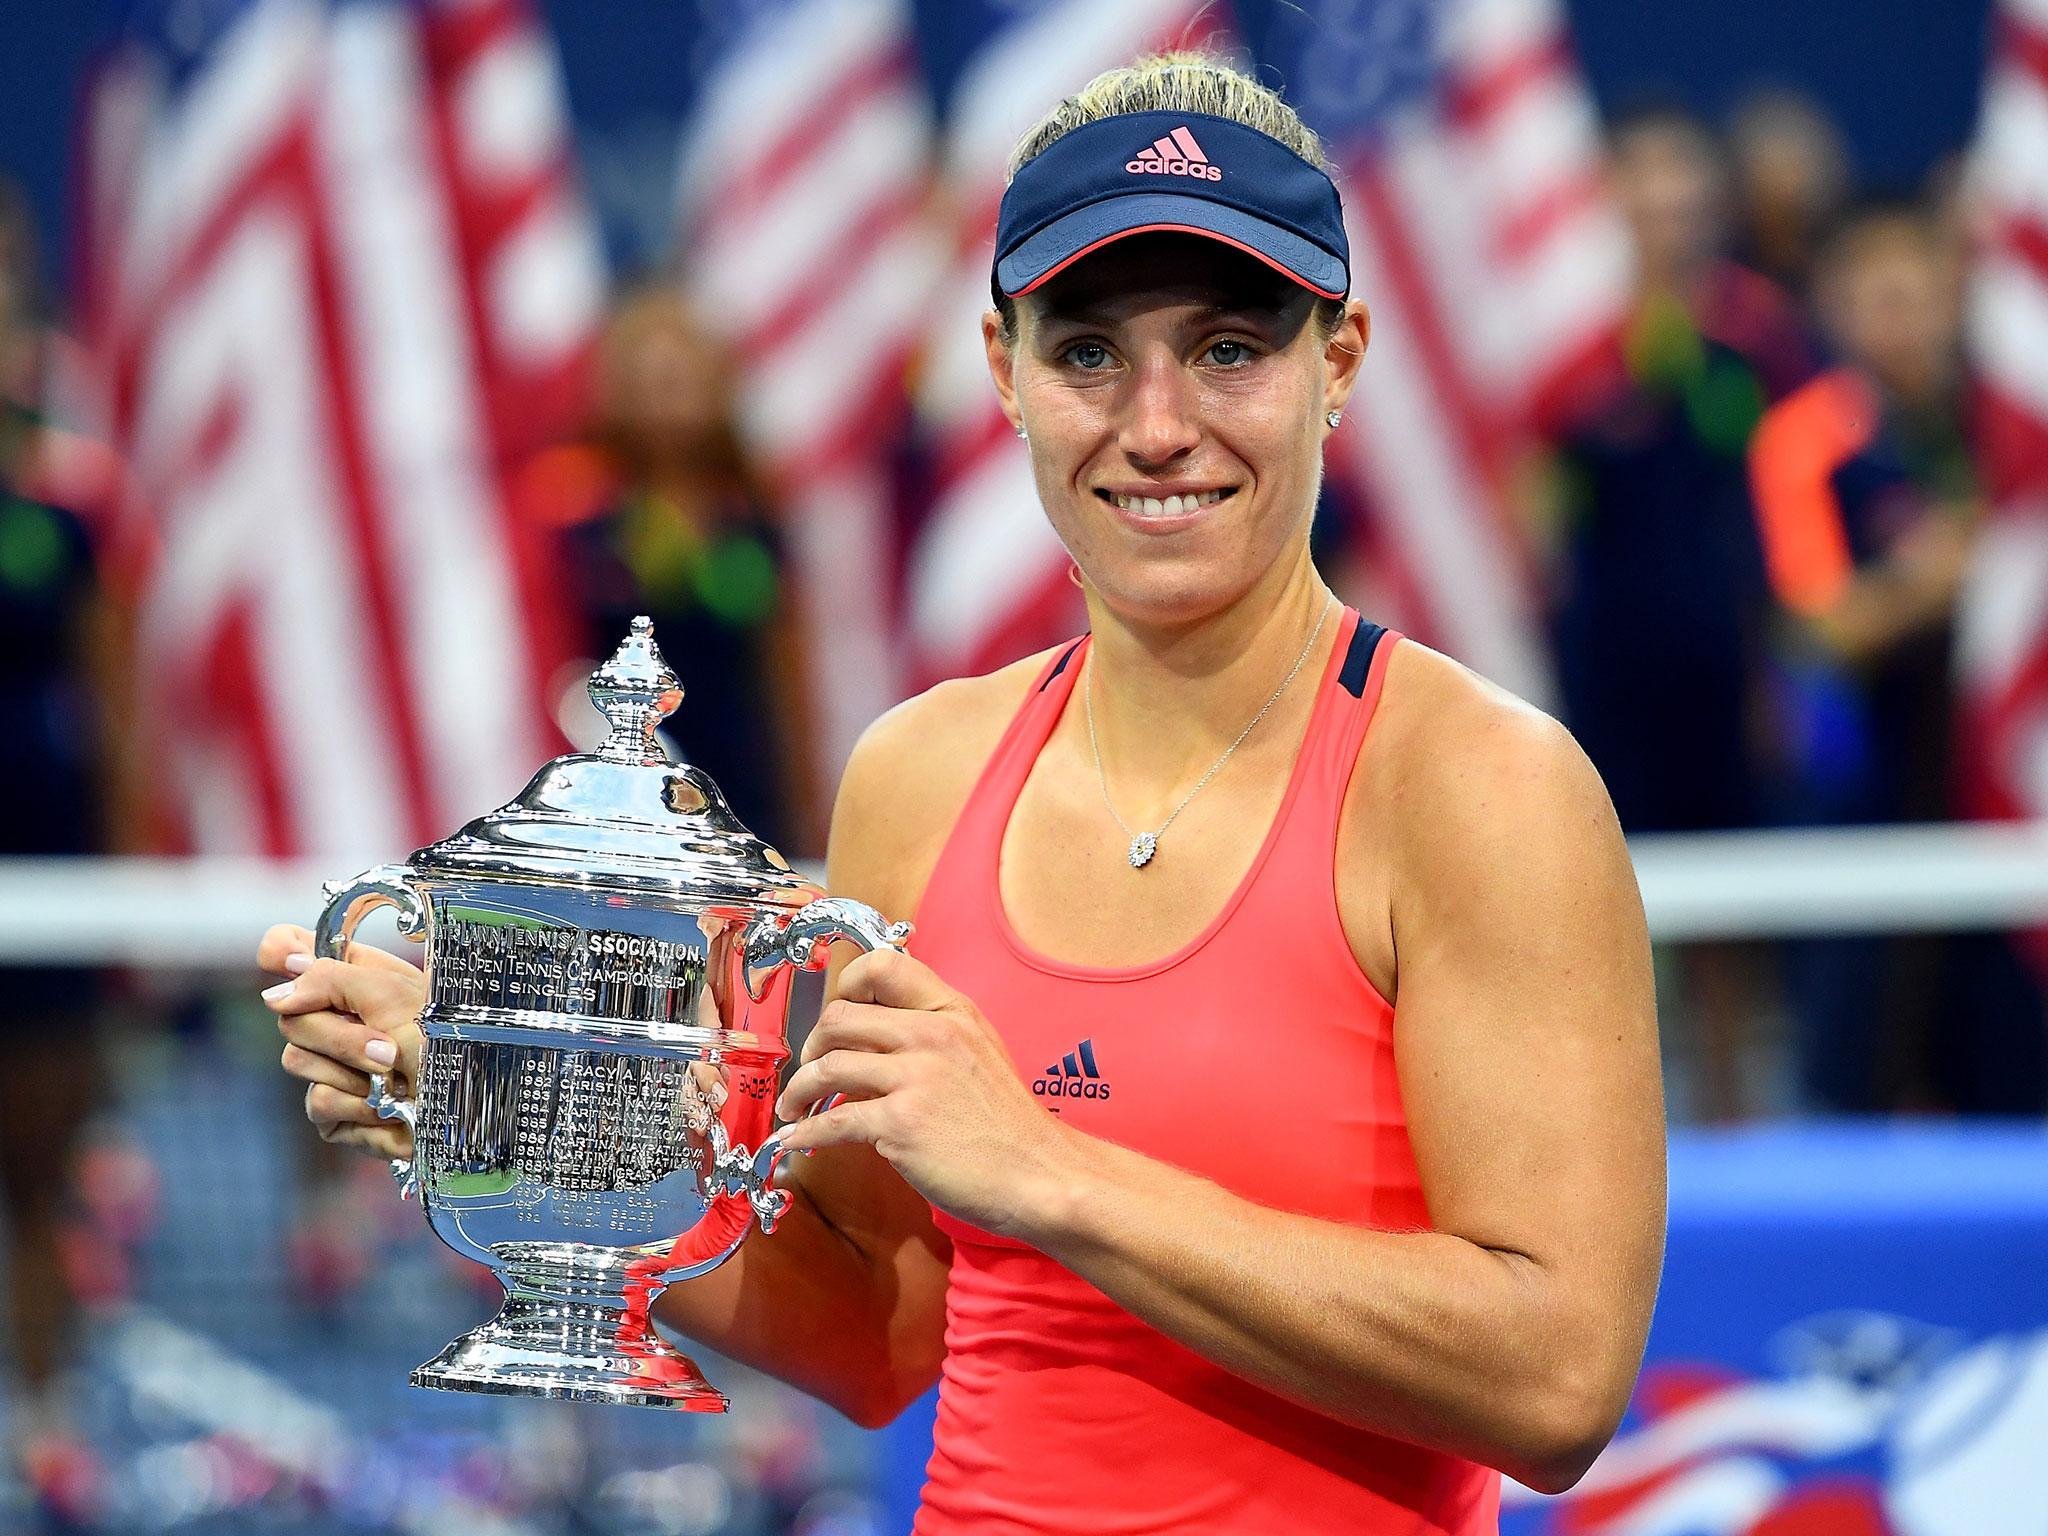 Kerber celebrates with the US Open trophy after her victory over Pliskova